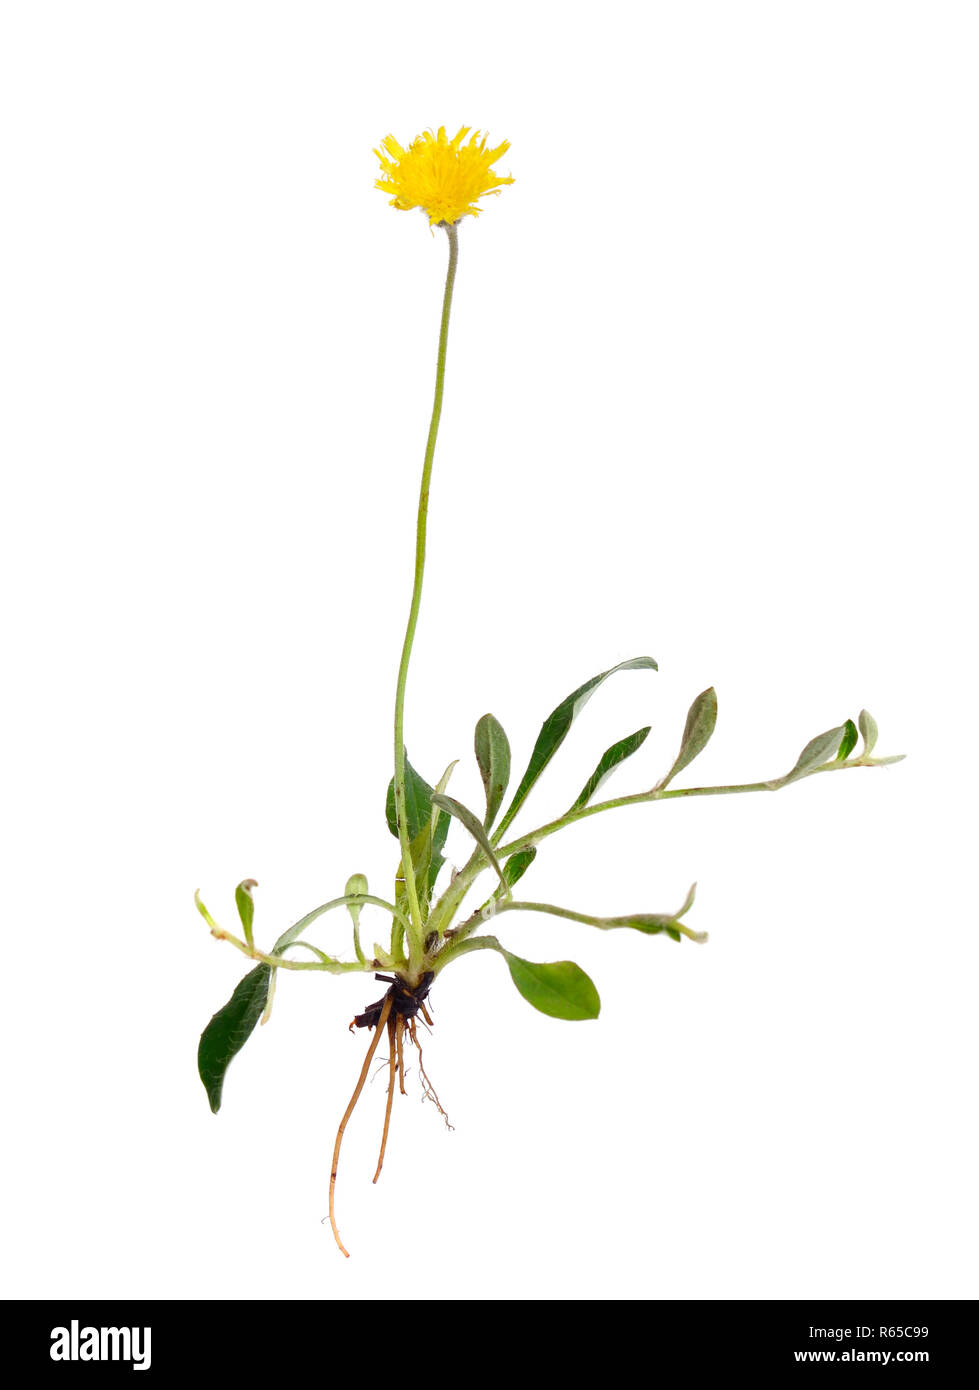 Hieracium pilosella (Pilosella officinarum), known as mouse-ear hawkweed. Isolated on white background. Stock Photo